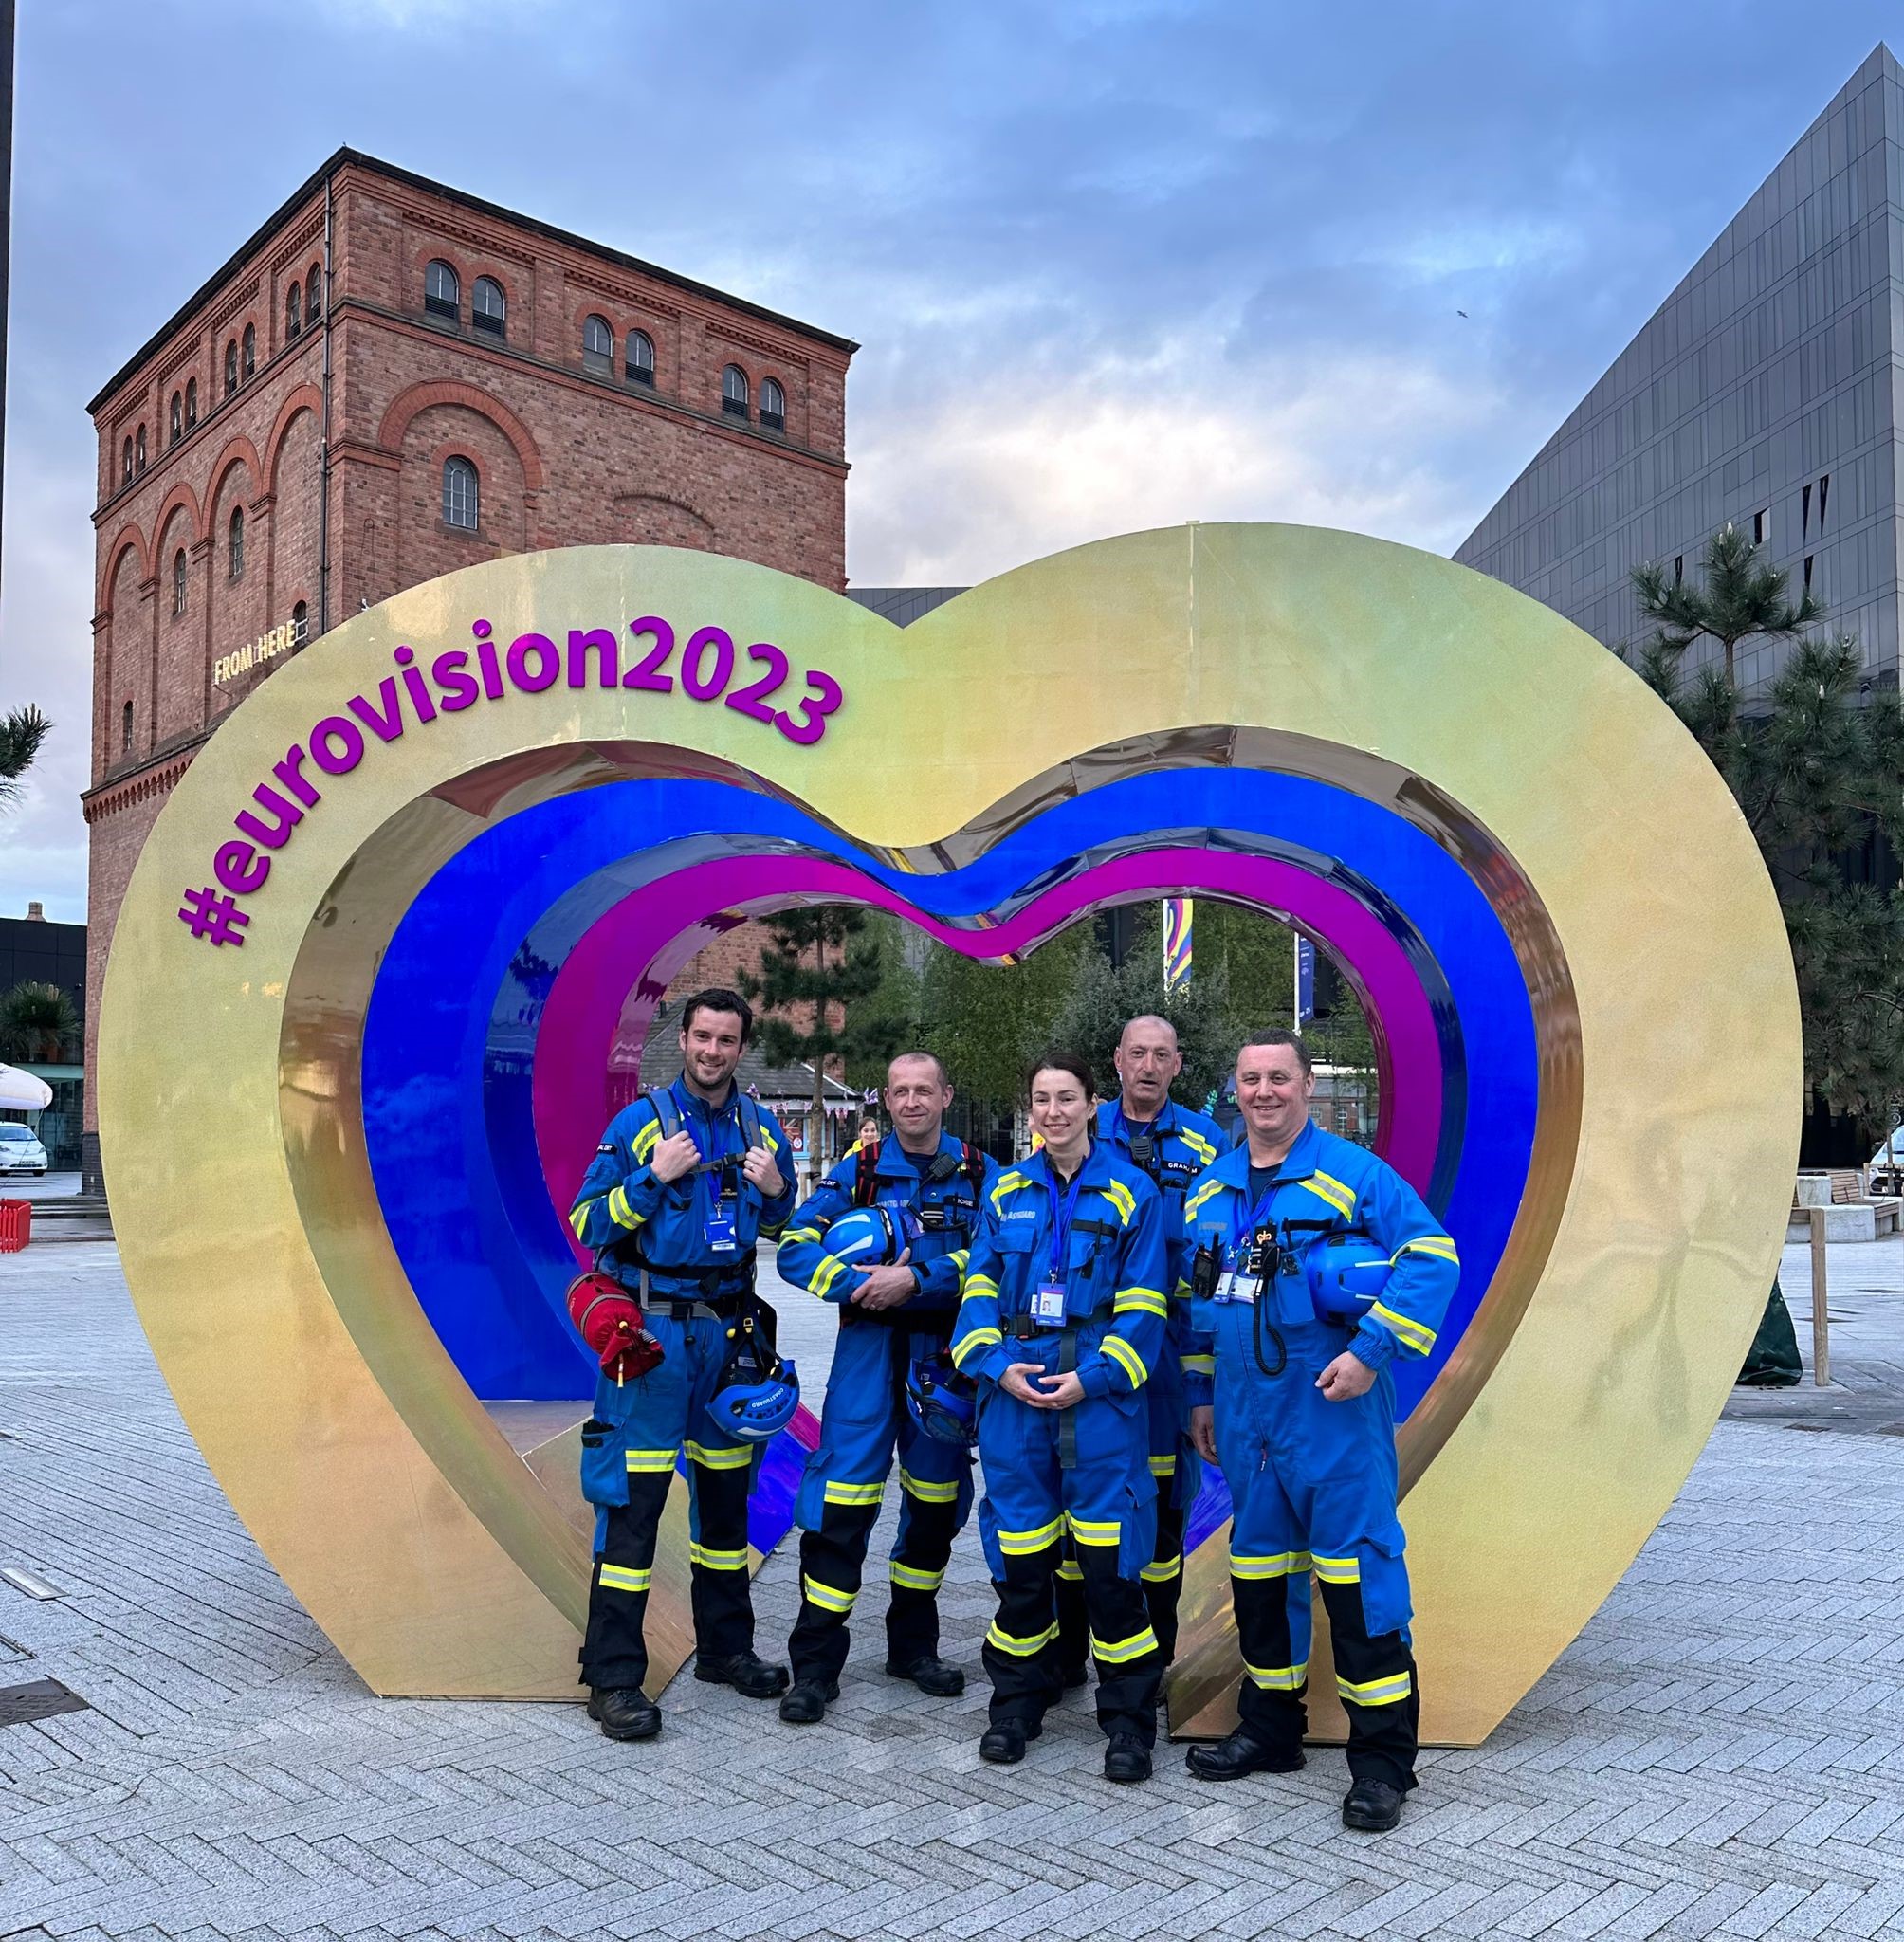 Five coastguards in uniform in front of Eurovision heart photo space in Liverpool